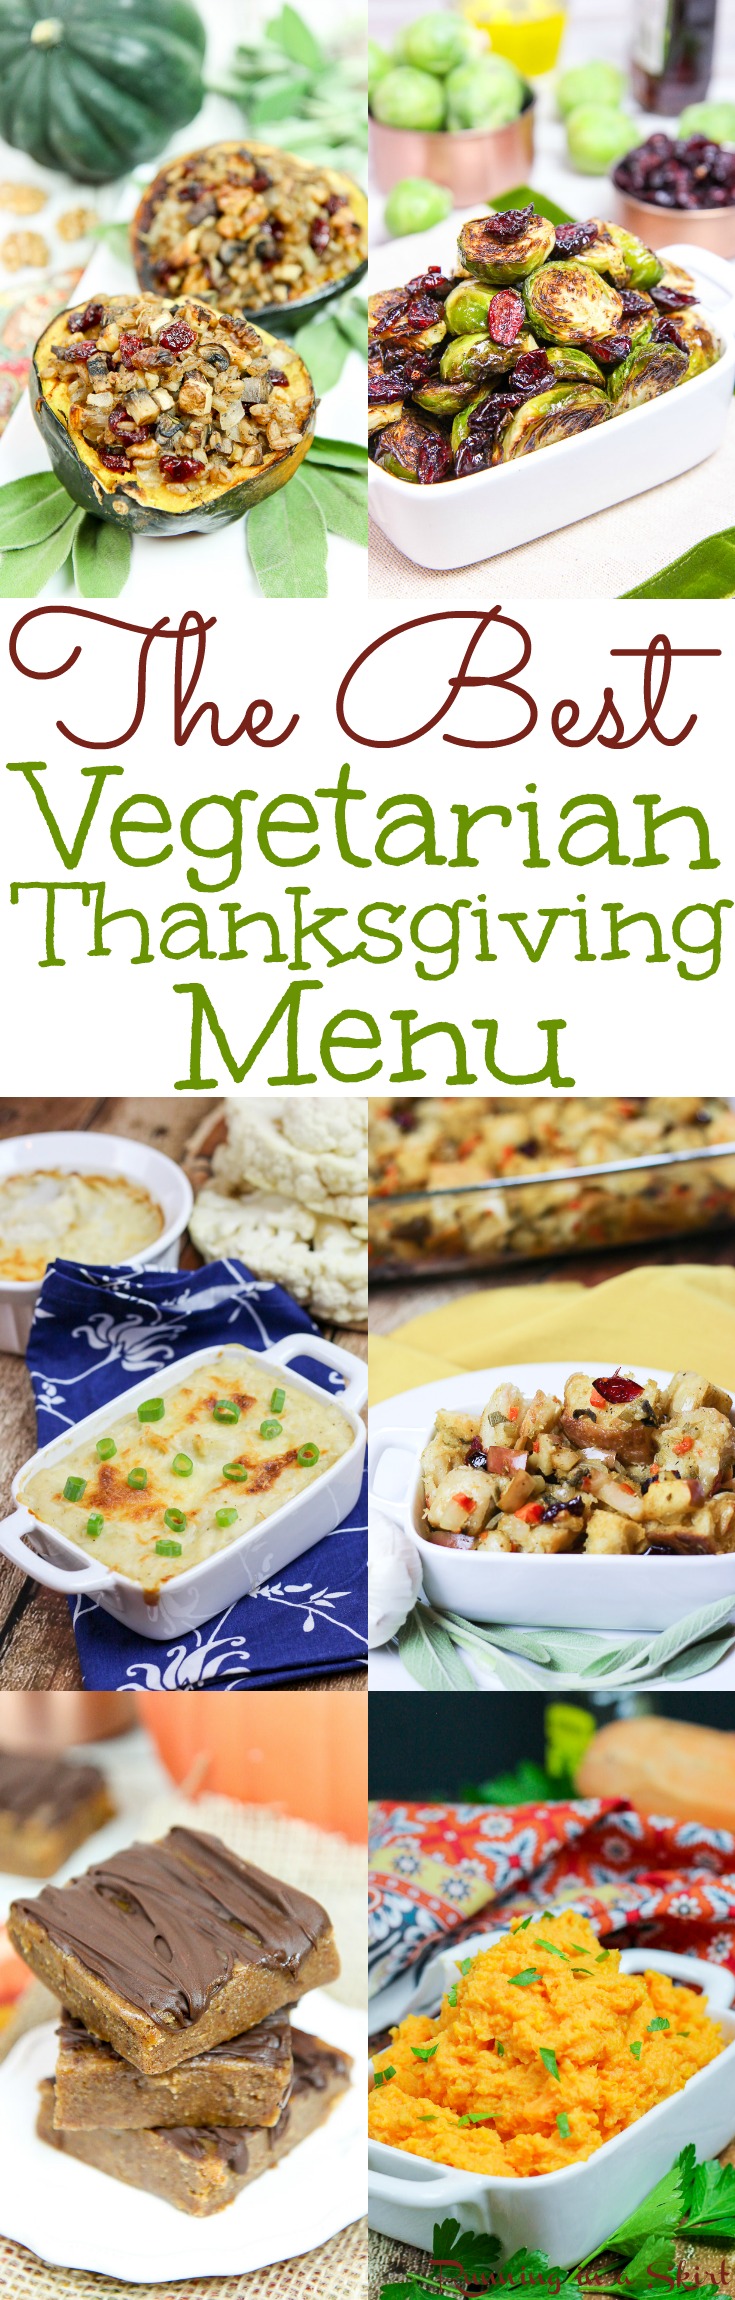 The Best Vegetarian Thanksgiving Dinner Menu. Includes a vegetarian / vegan thanksgiving main dish entree, recipes for sides like stuffing, sweet potato, veggies like brussels sprouts, mashed cauliflower and dessert.  Mainly healthy with gluten free and vegan options. / Running in a Skirt  via @juliewunder